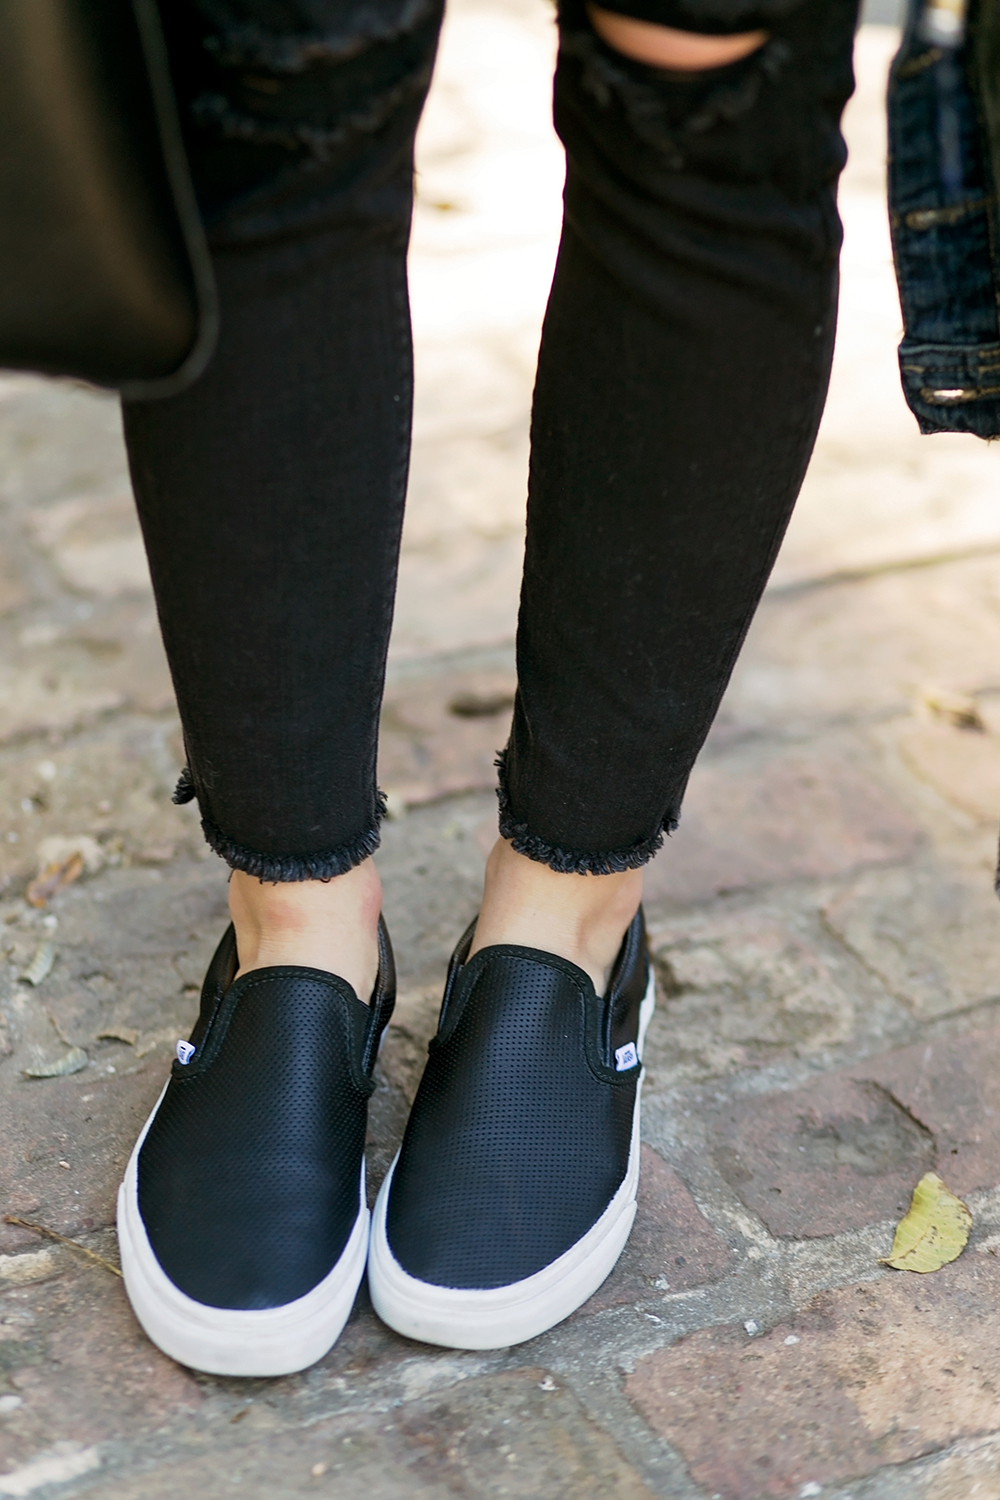 livvyland-blog-olivia-watson-austin-texas-fashion-blogger-toms-coffee-roasters-silver-jeans-tuesday-skinny-jeans-vans-slip-on-black-sneakers-1